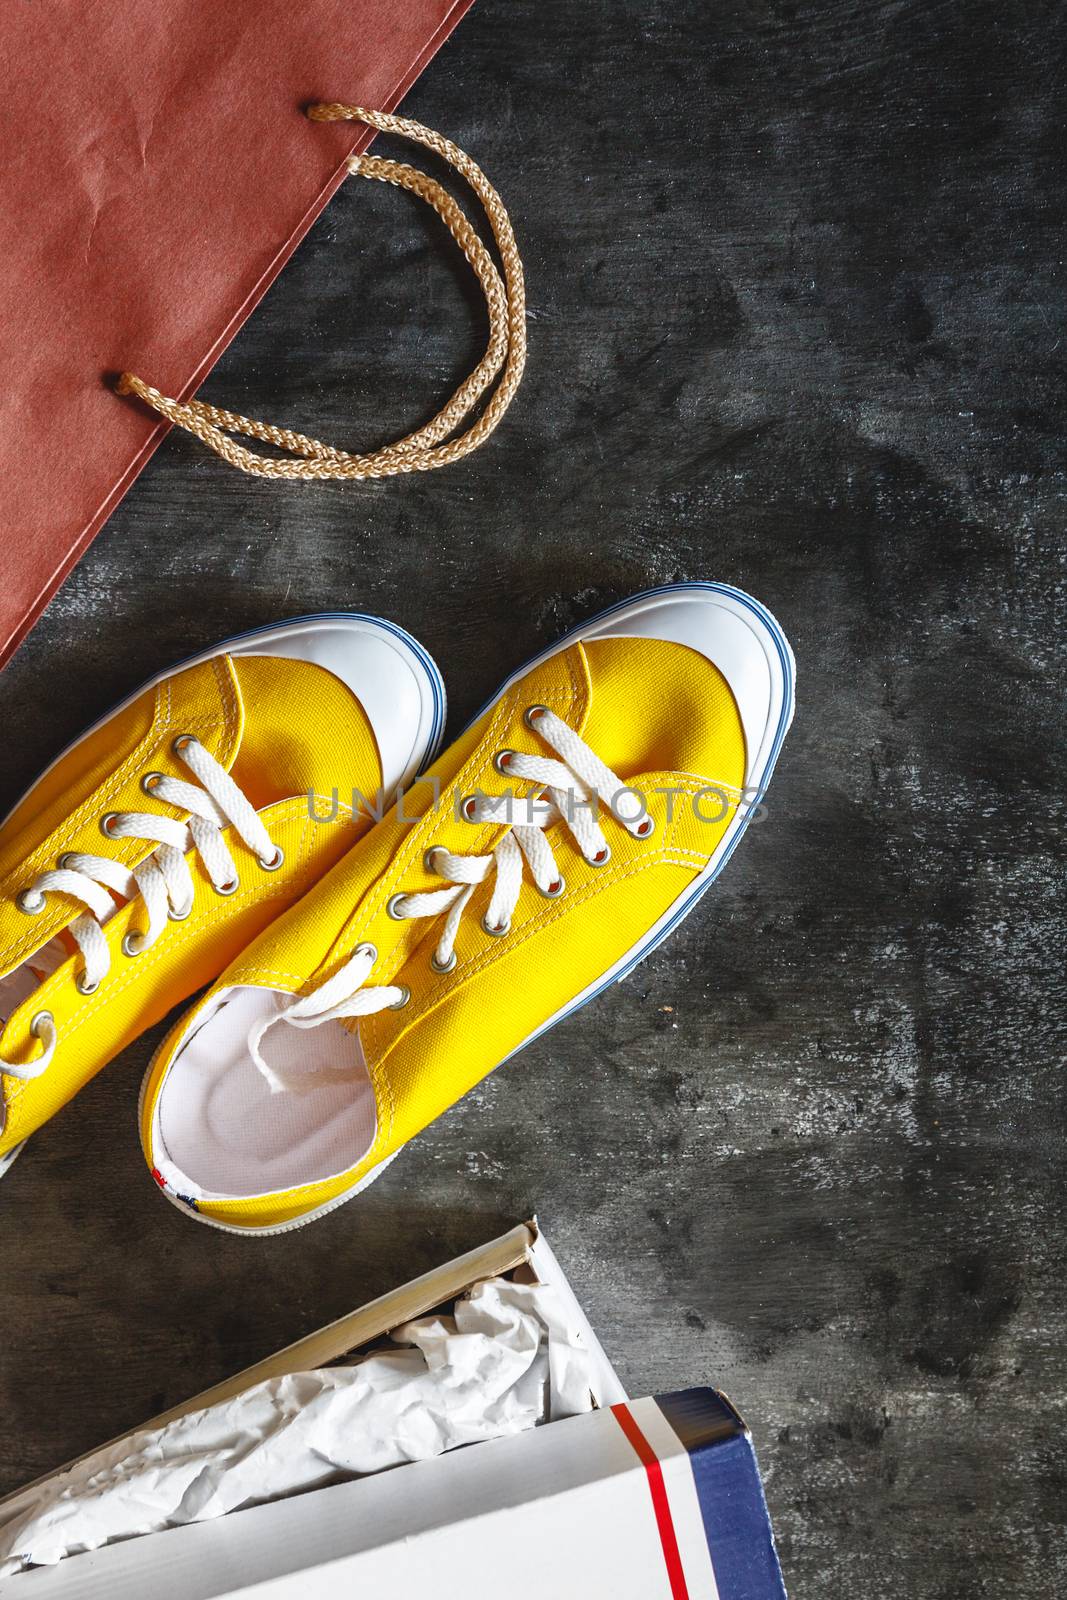 New yellow sneakers, box and package from the store on a dark co by Tanacha